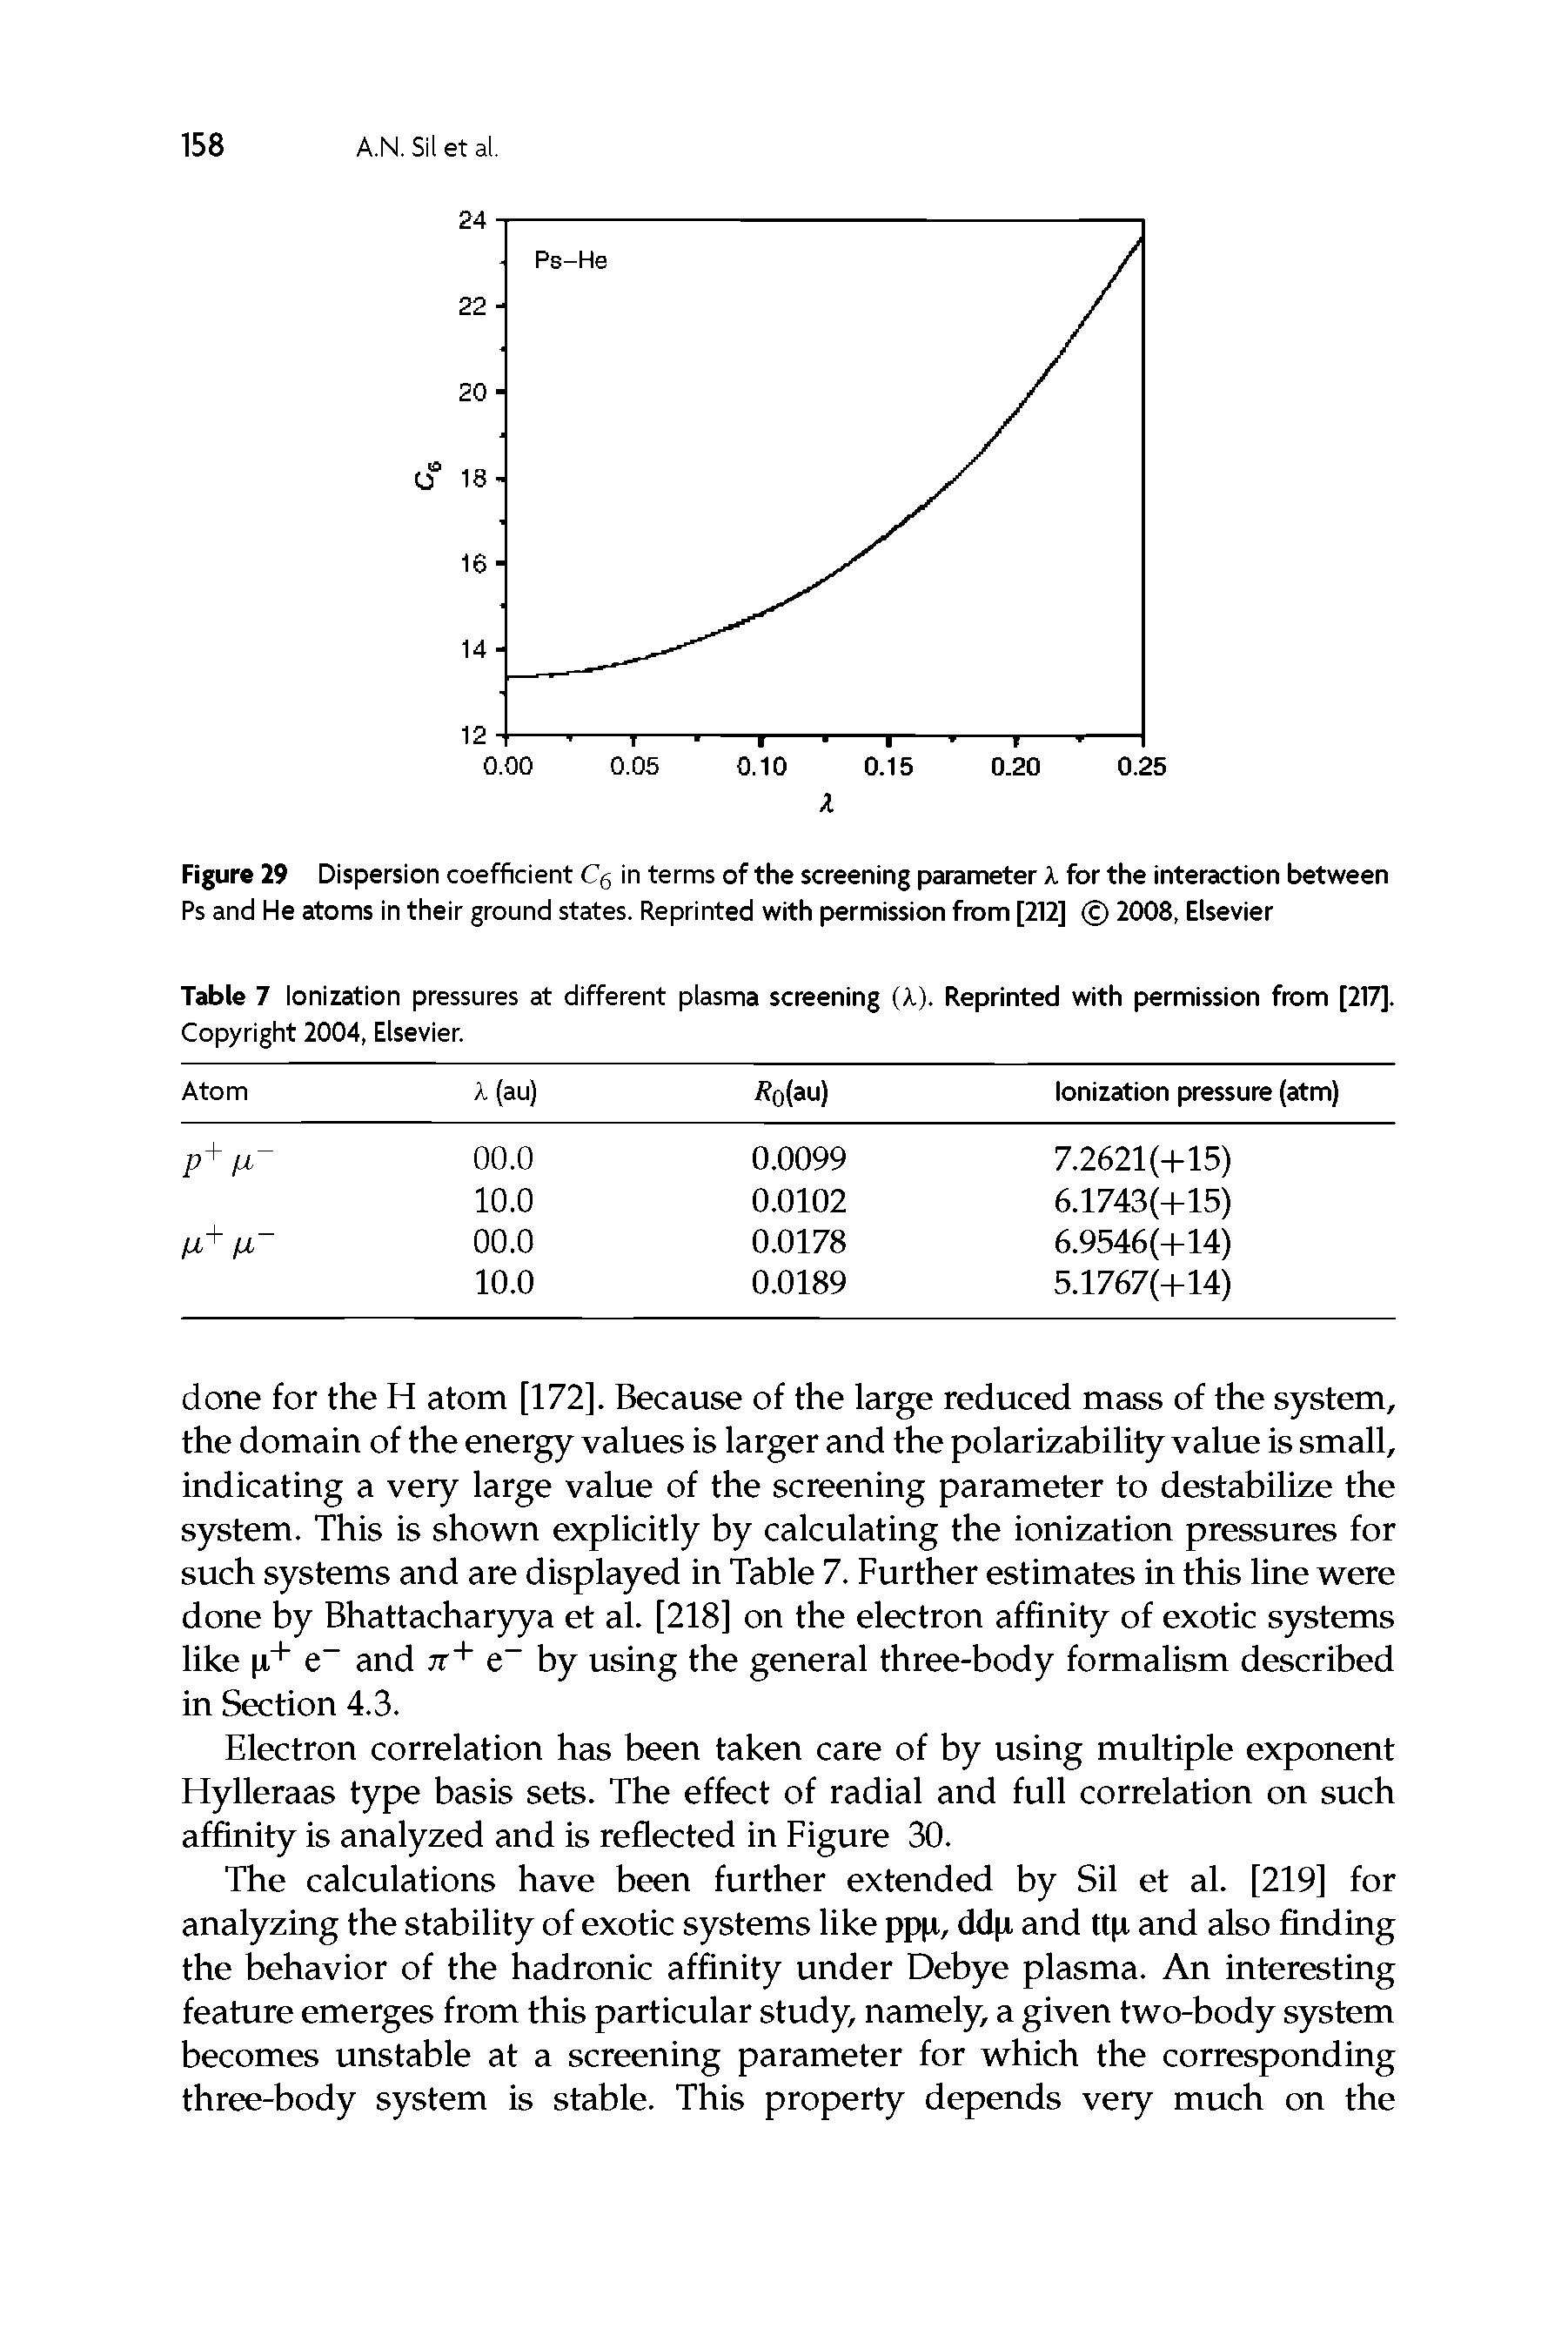 Table 7 Ionization pressures at different plasma screening (X). Reprinted with permission from [217]. Copyright 2004, Elsevier.